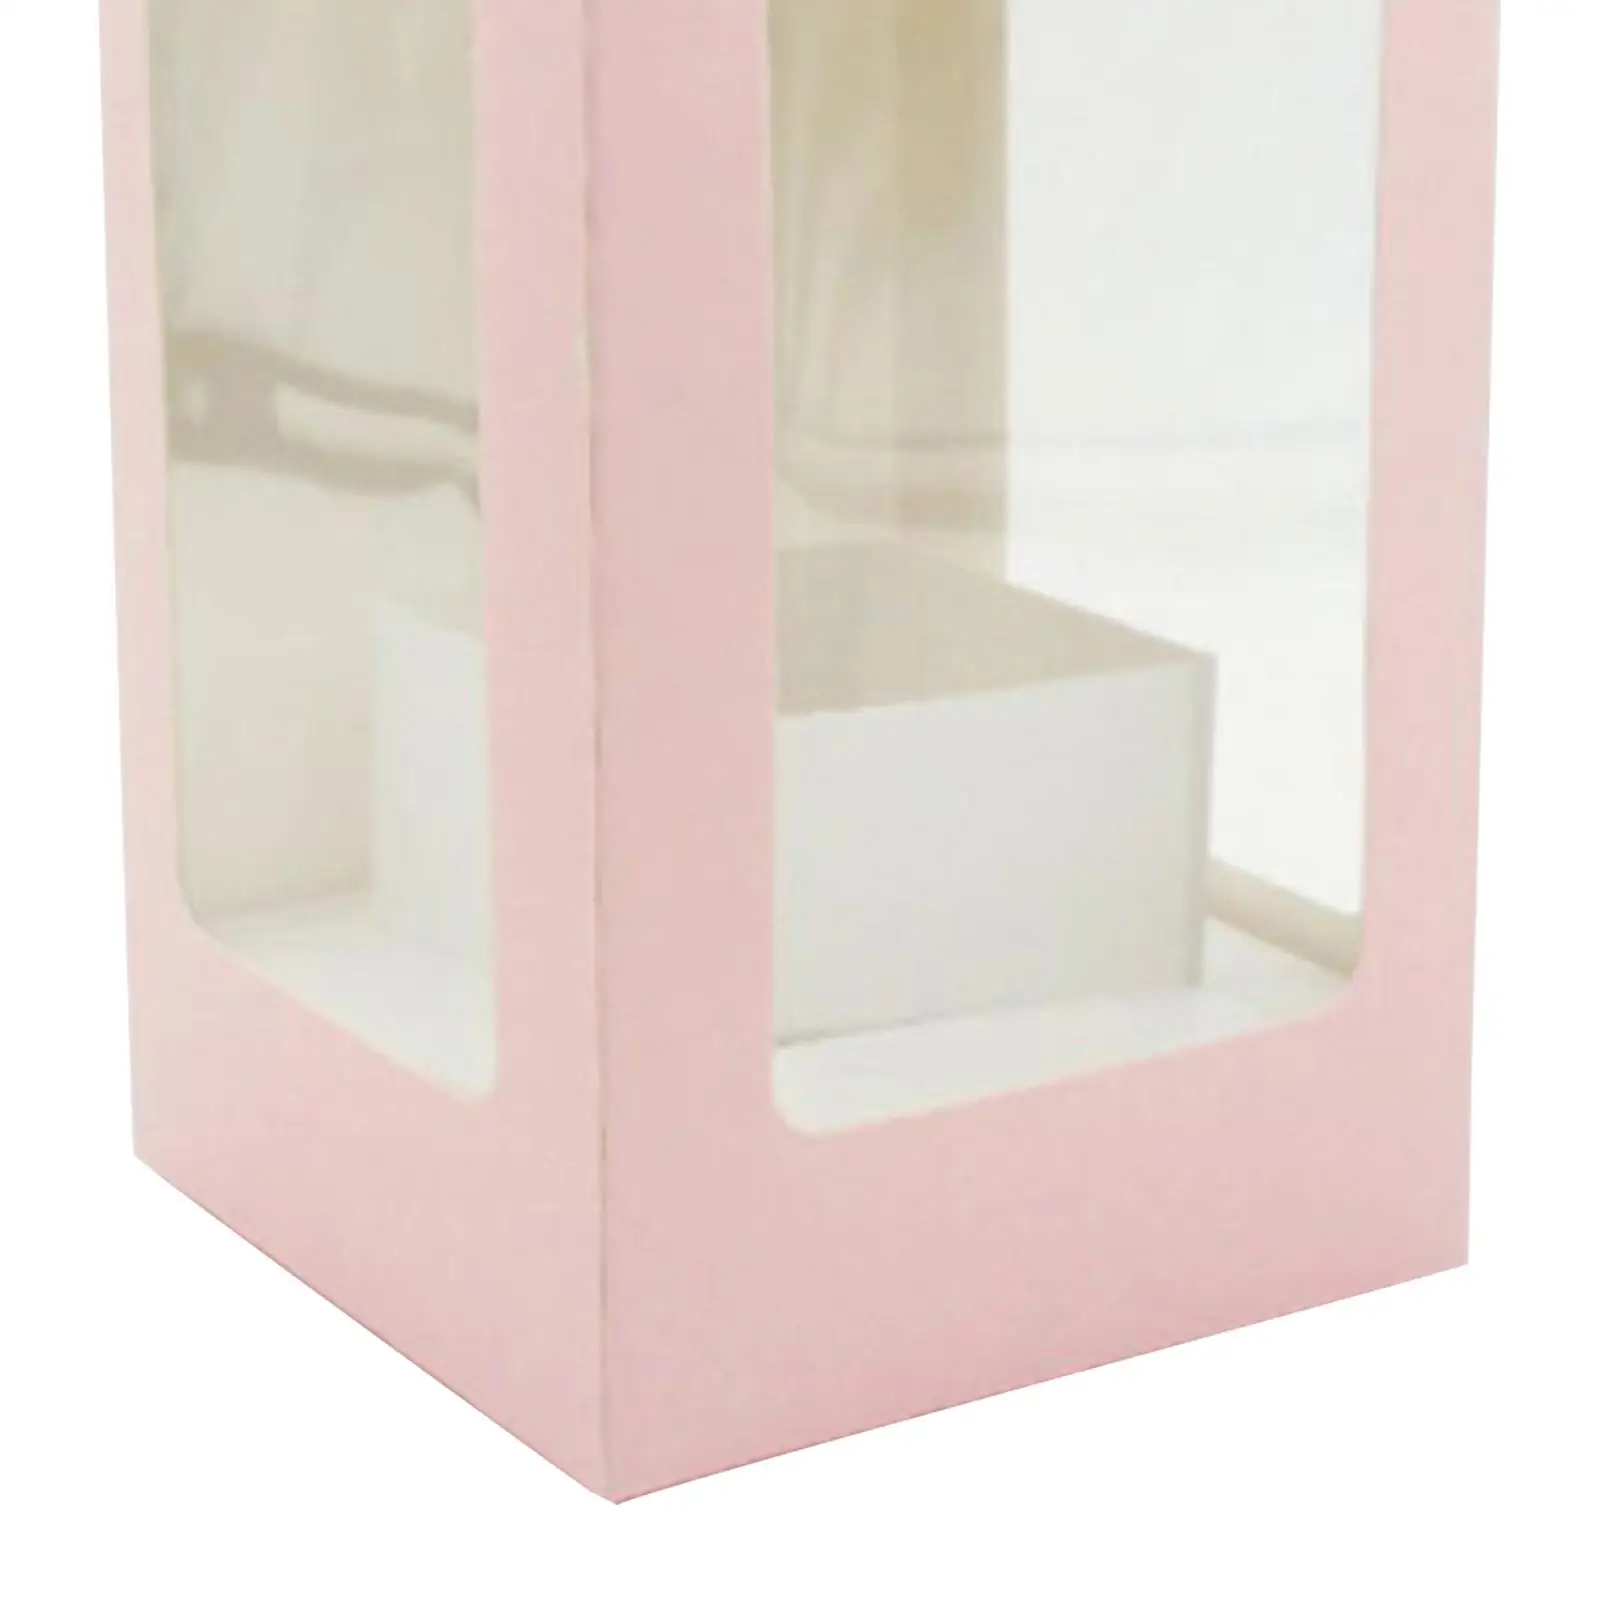 Floral Packaging Boxes Clear Window Shop with Handle Party Graduation Portable Flower Box Flower Bags Flower Wrapping Boxes